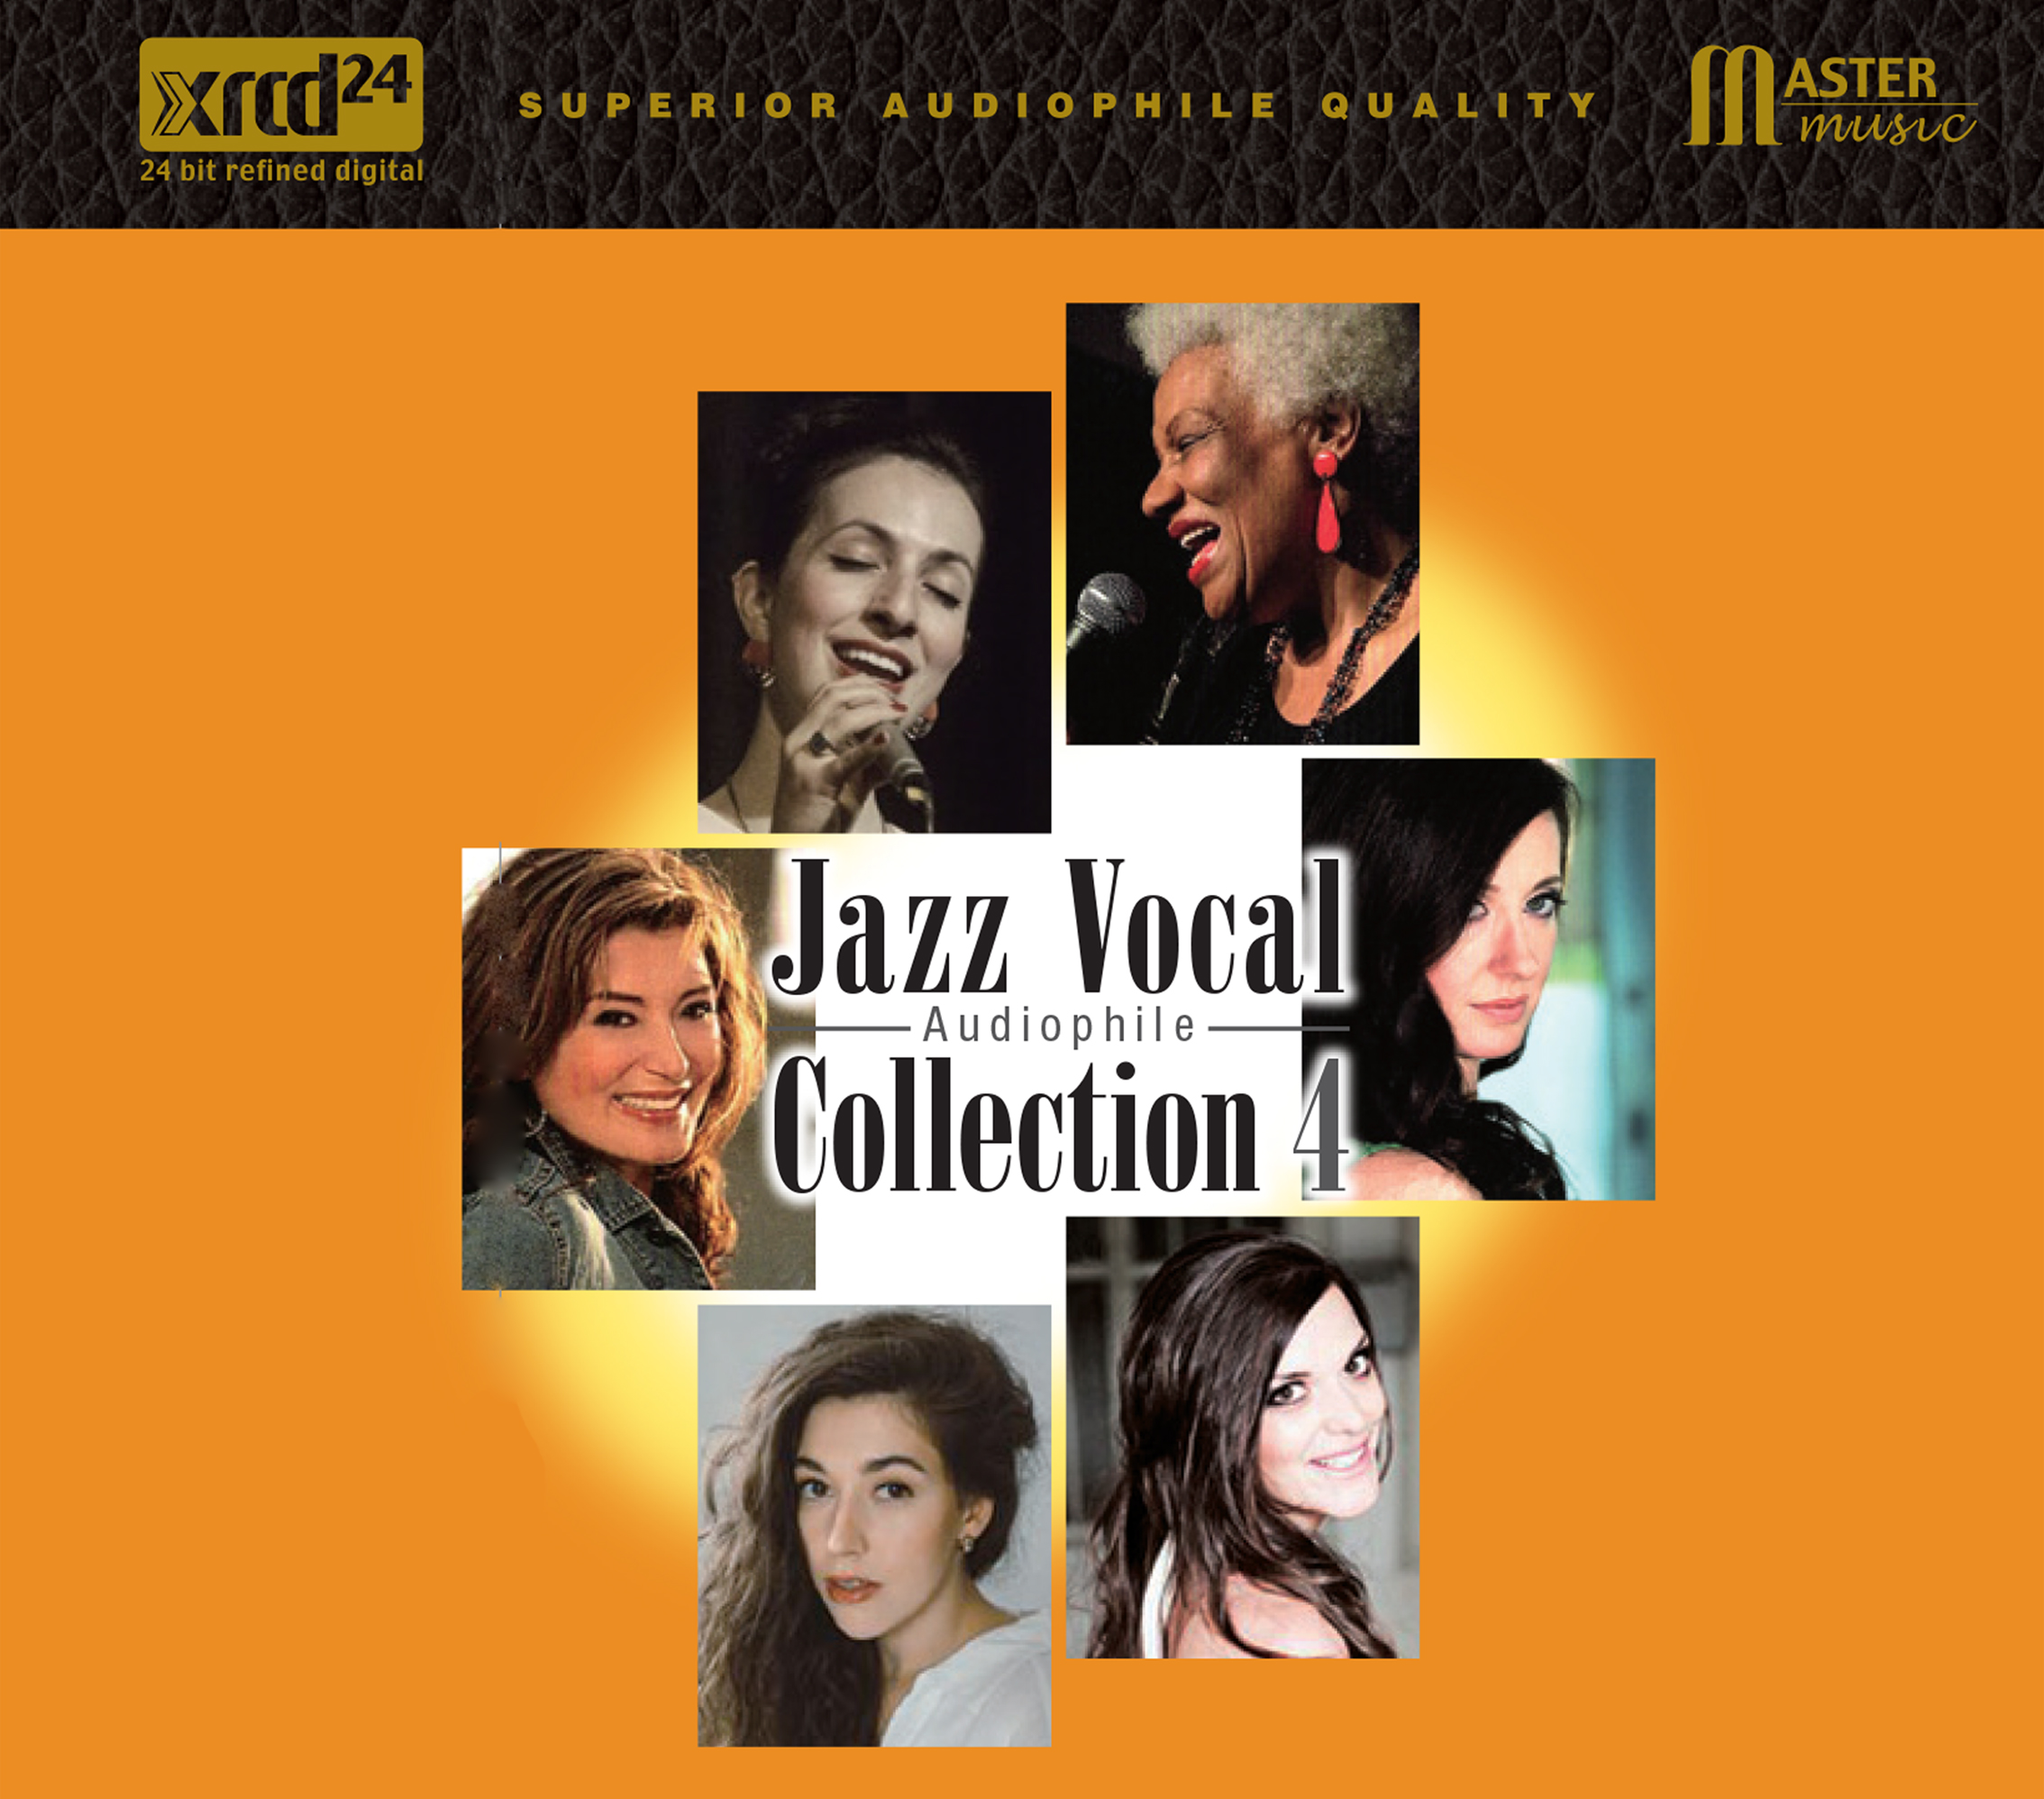 Jazz Vocal Audiophile Collection 4